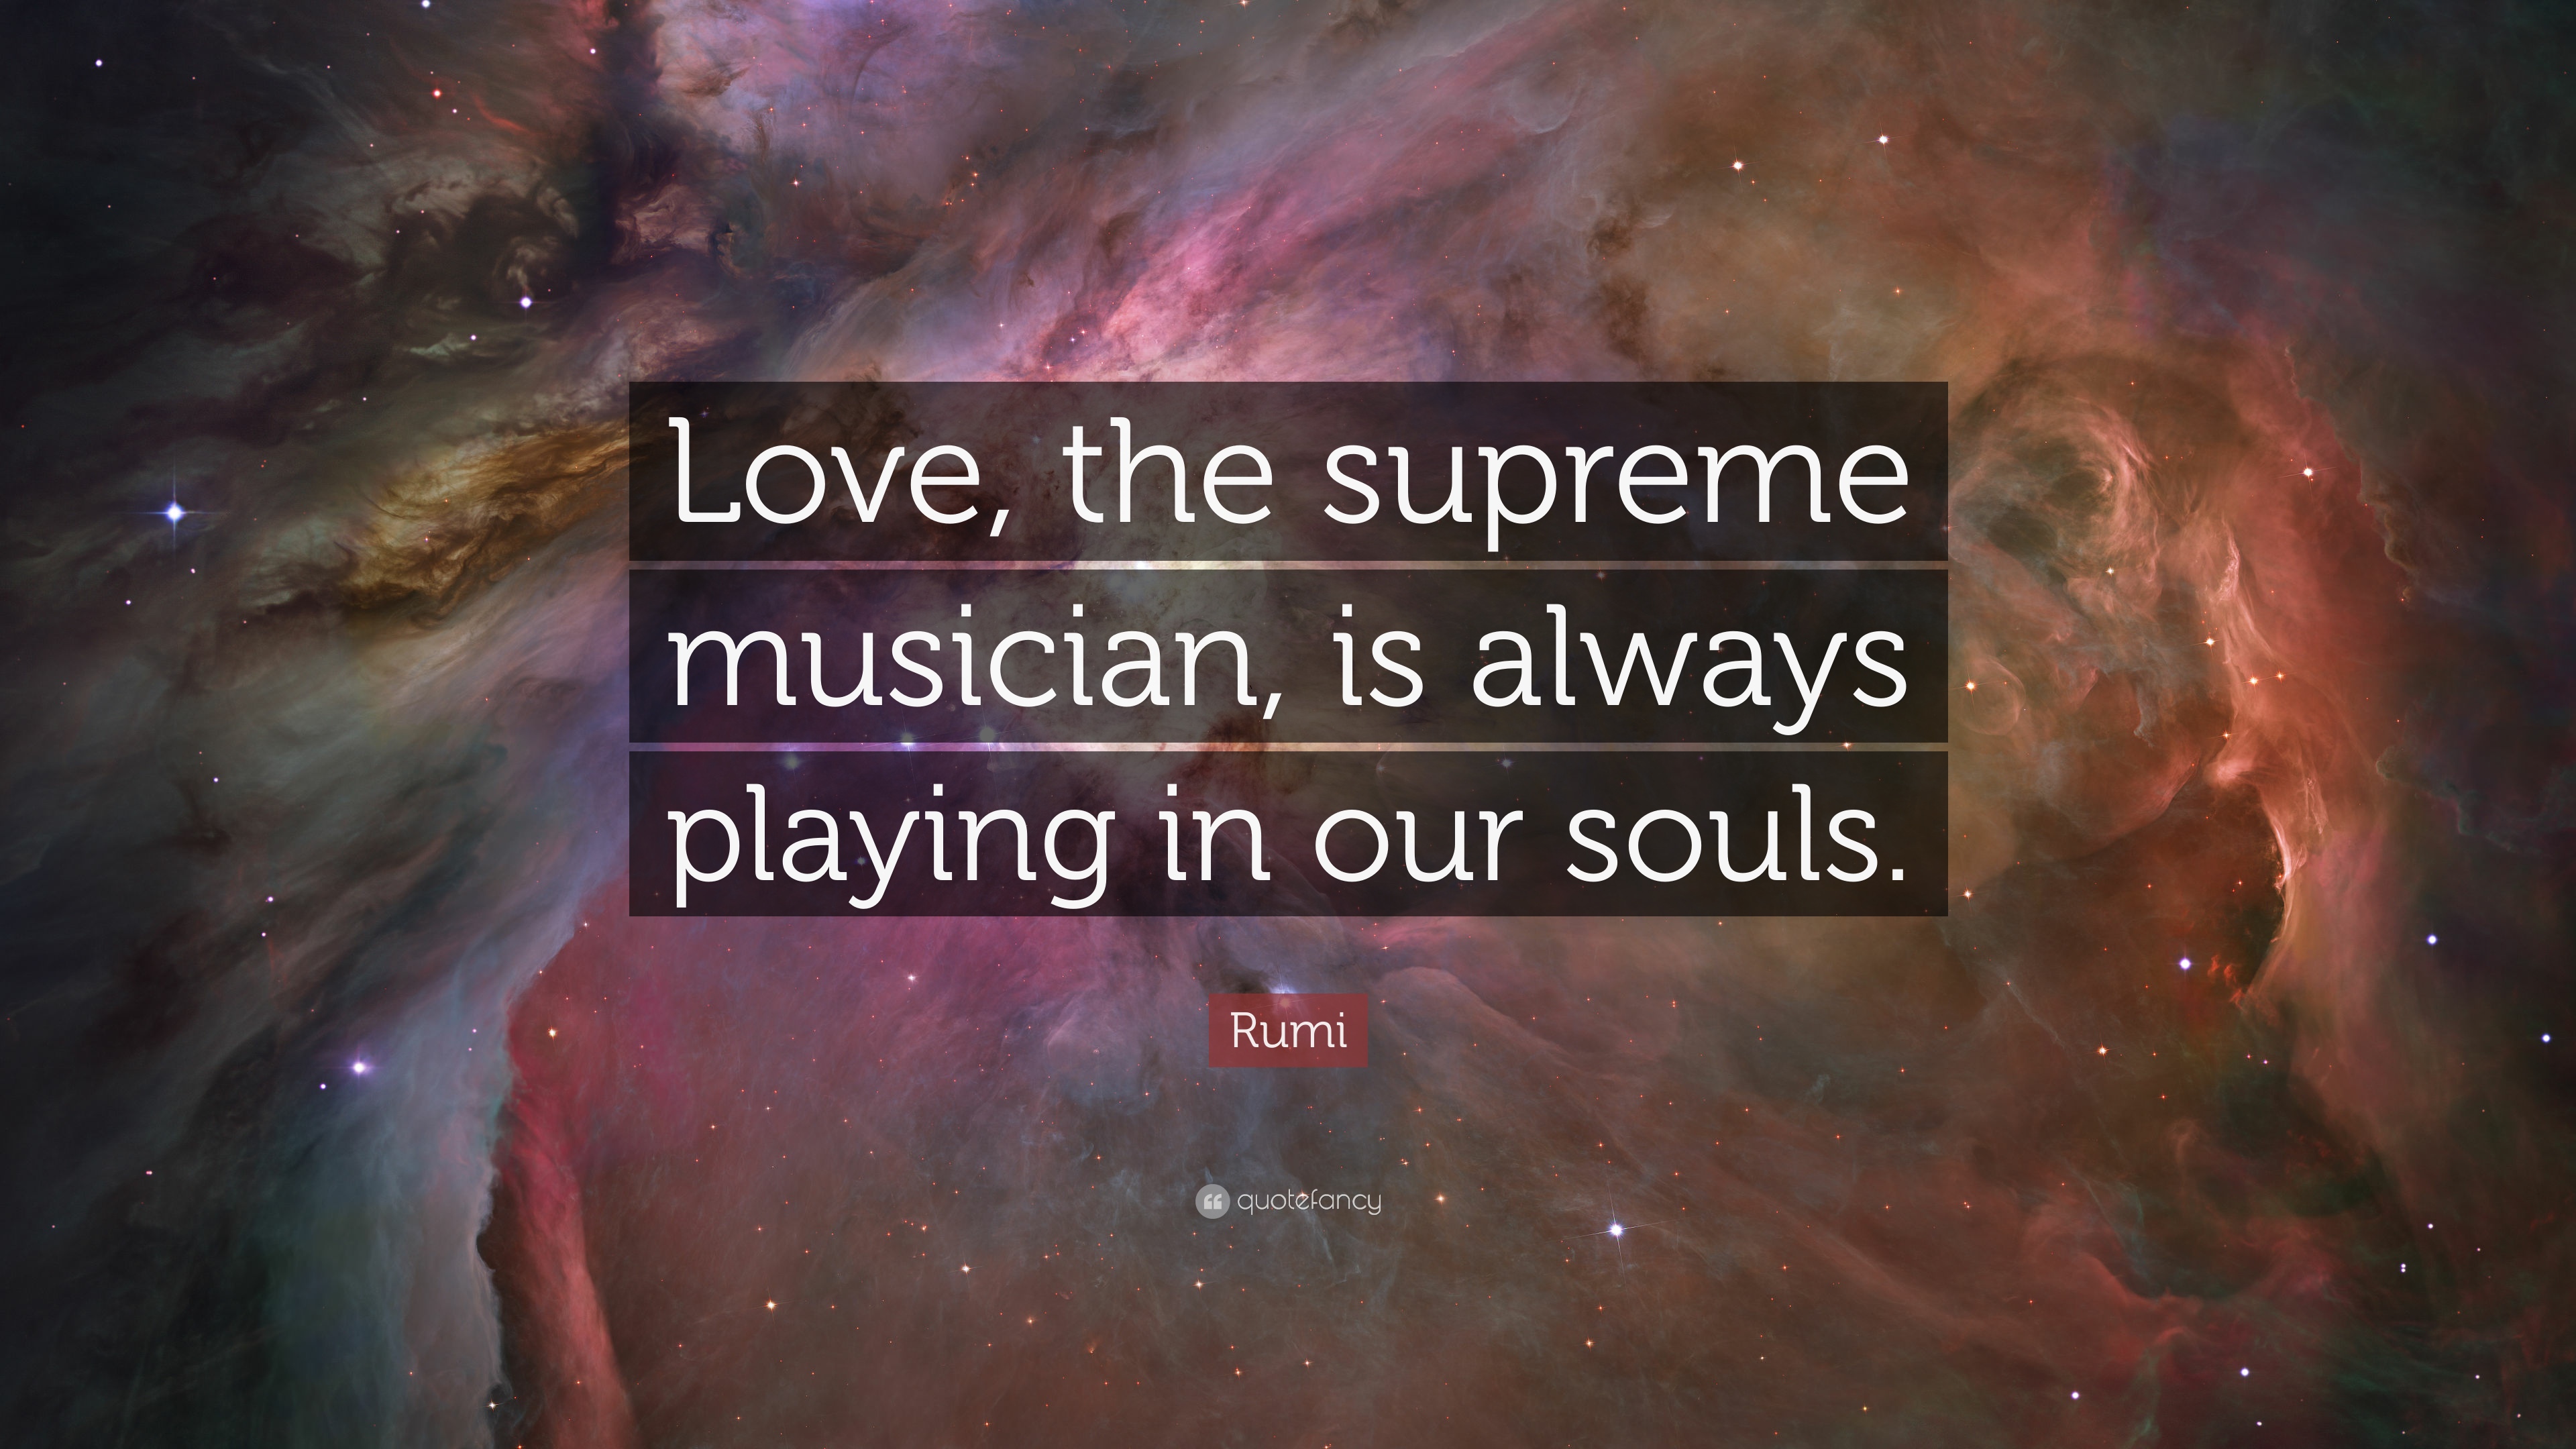 Rumi Quote: “Love, the supreme musician, is always playing